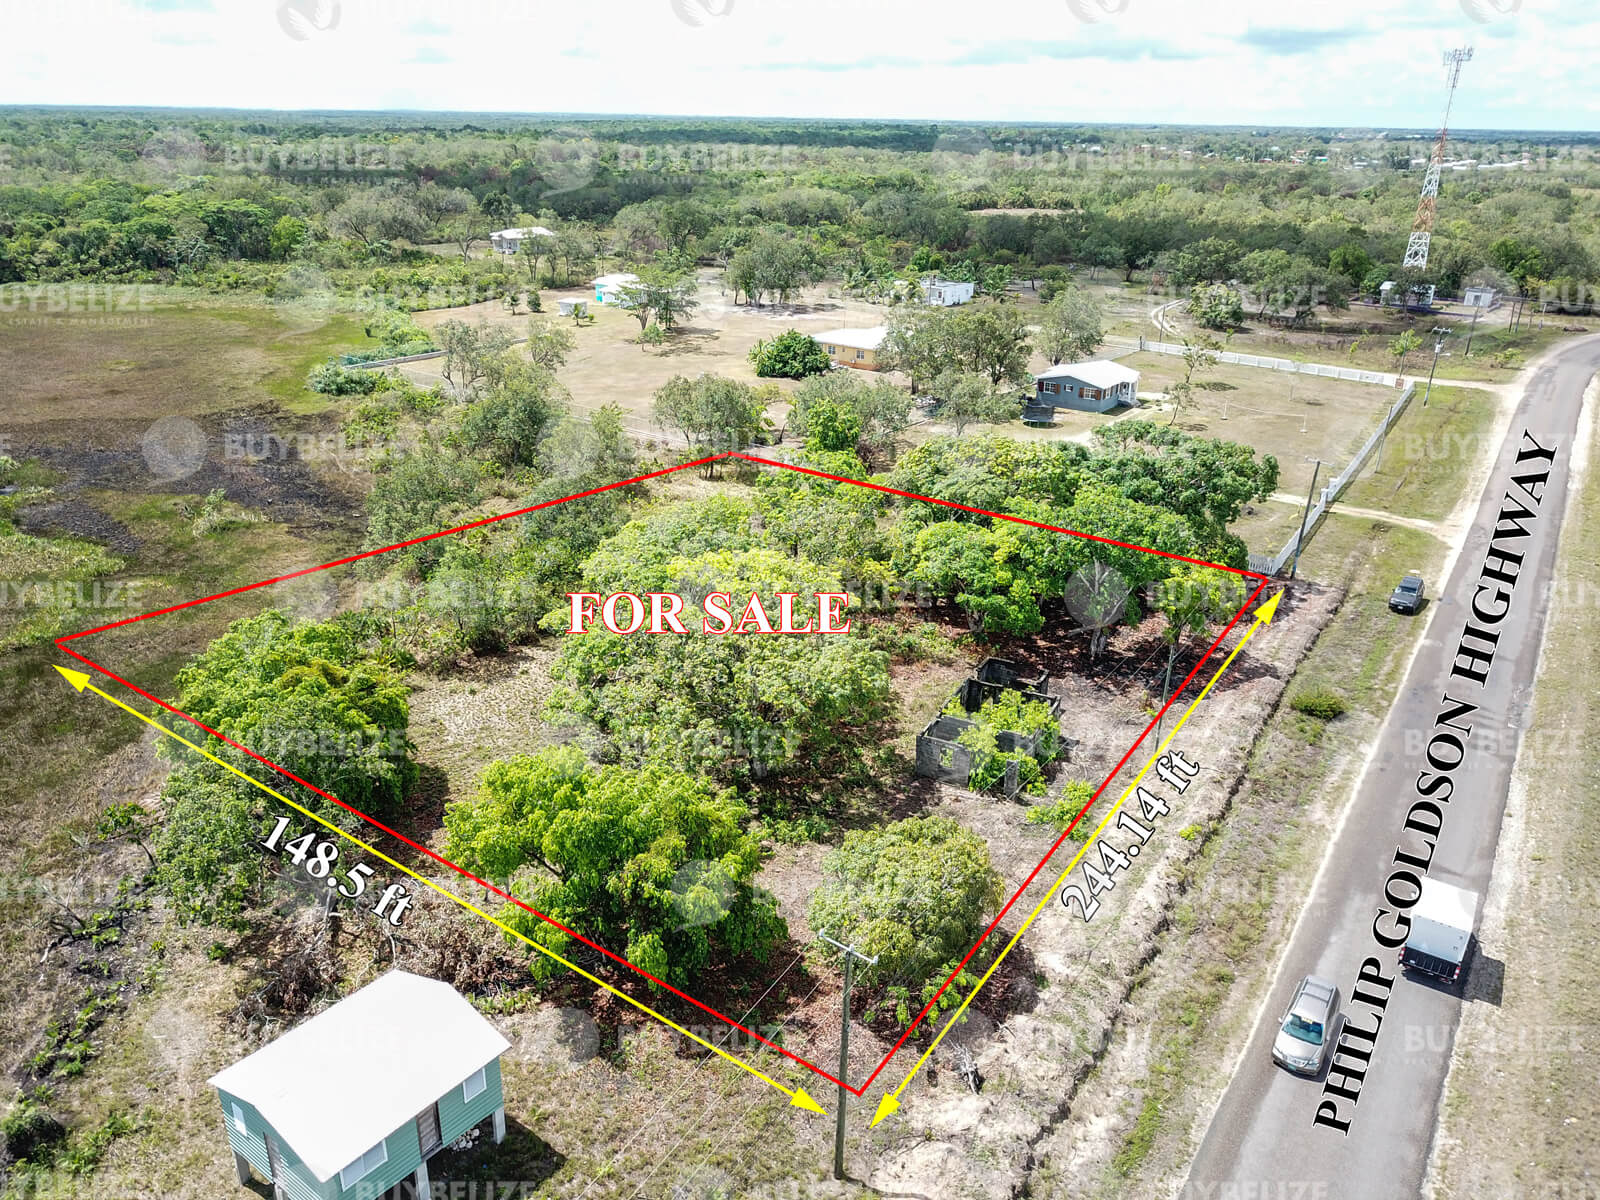 1 Acre Residential/Commercial Lot